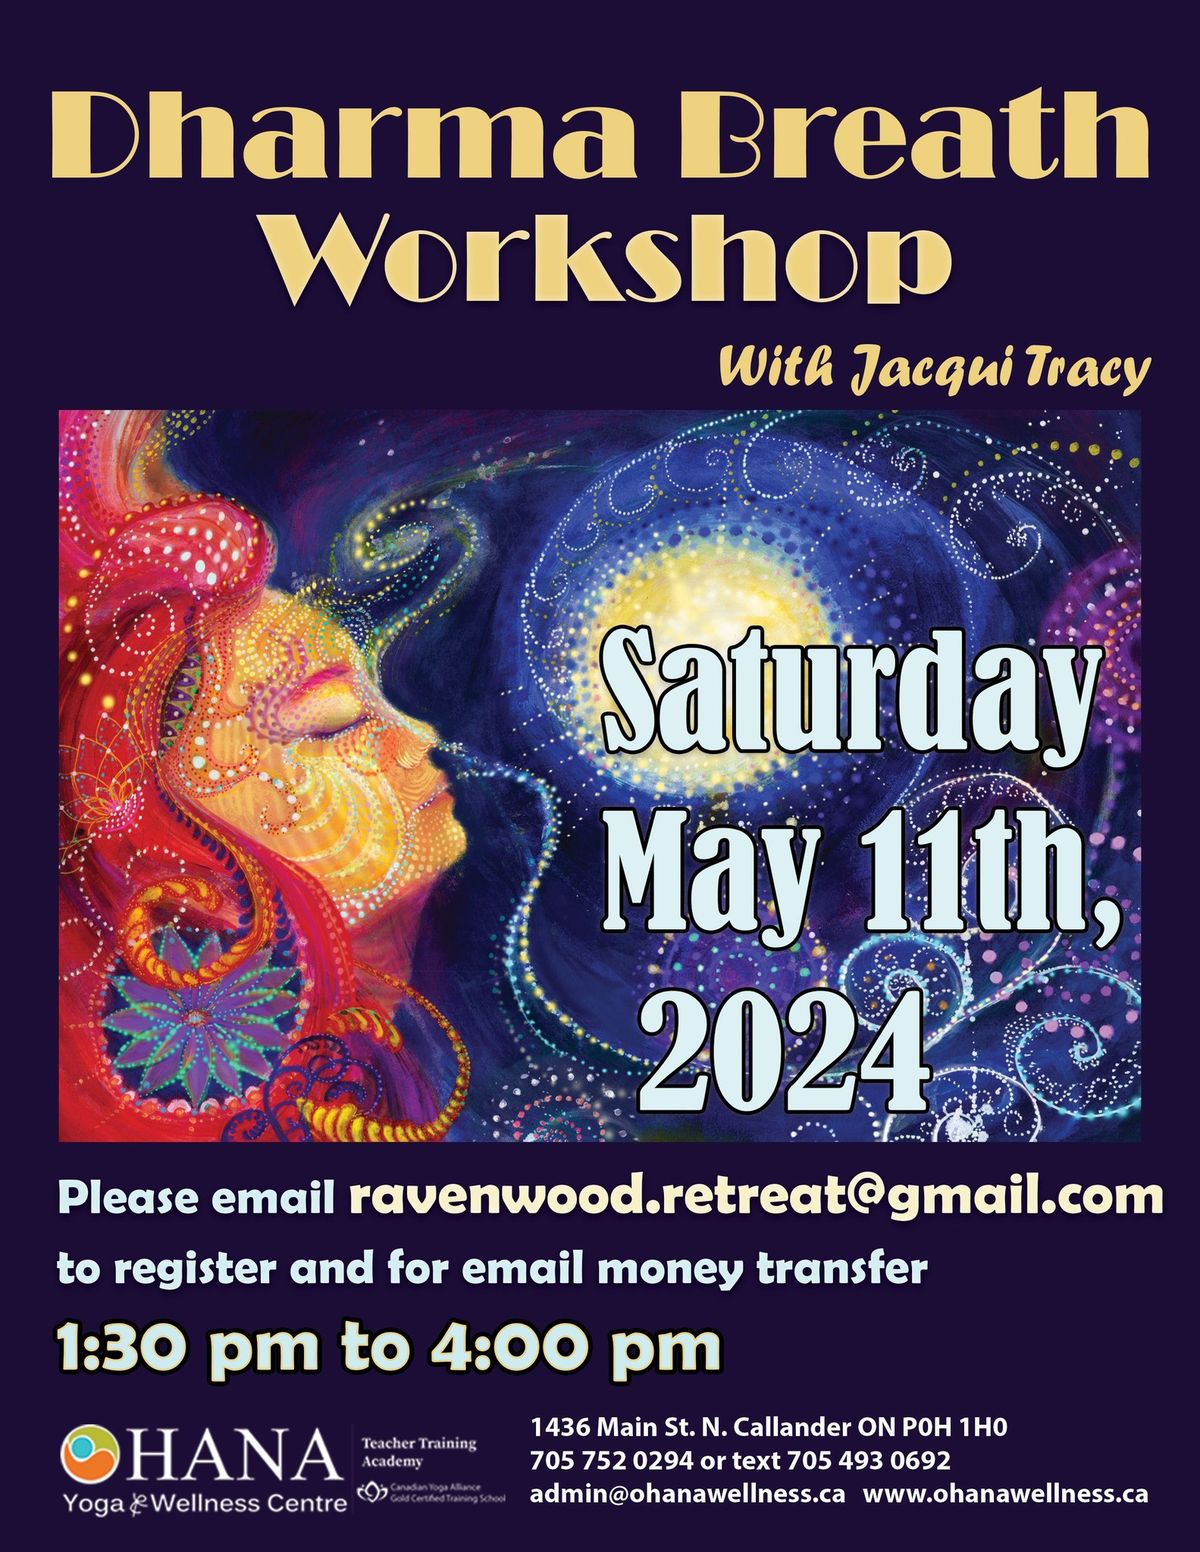 DHARMA BREATH WORKSHOP with Jacqui Tracy